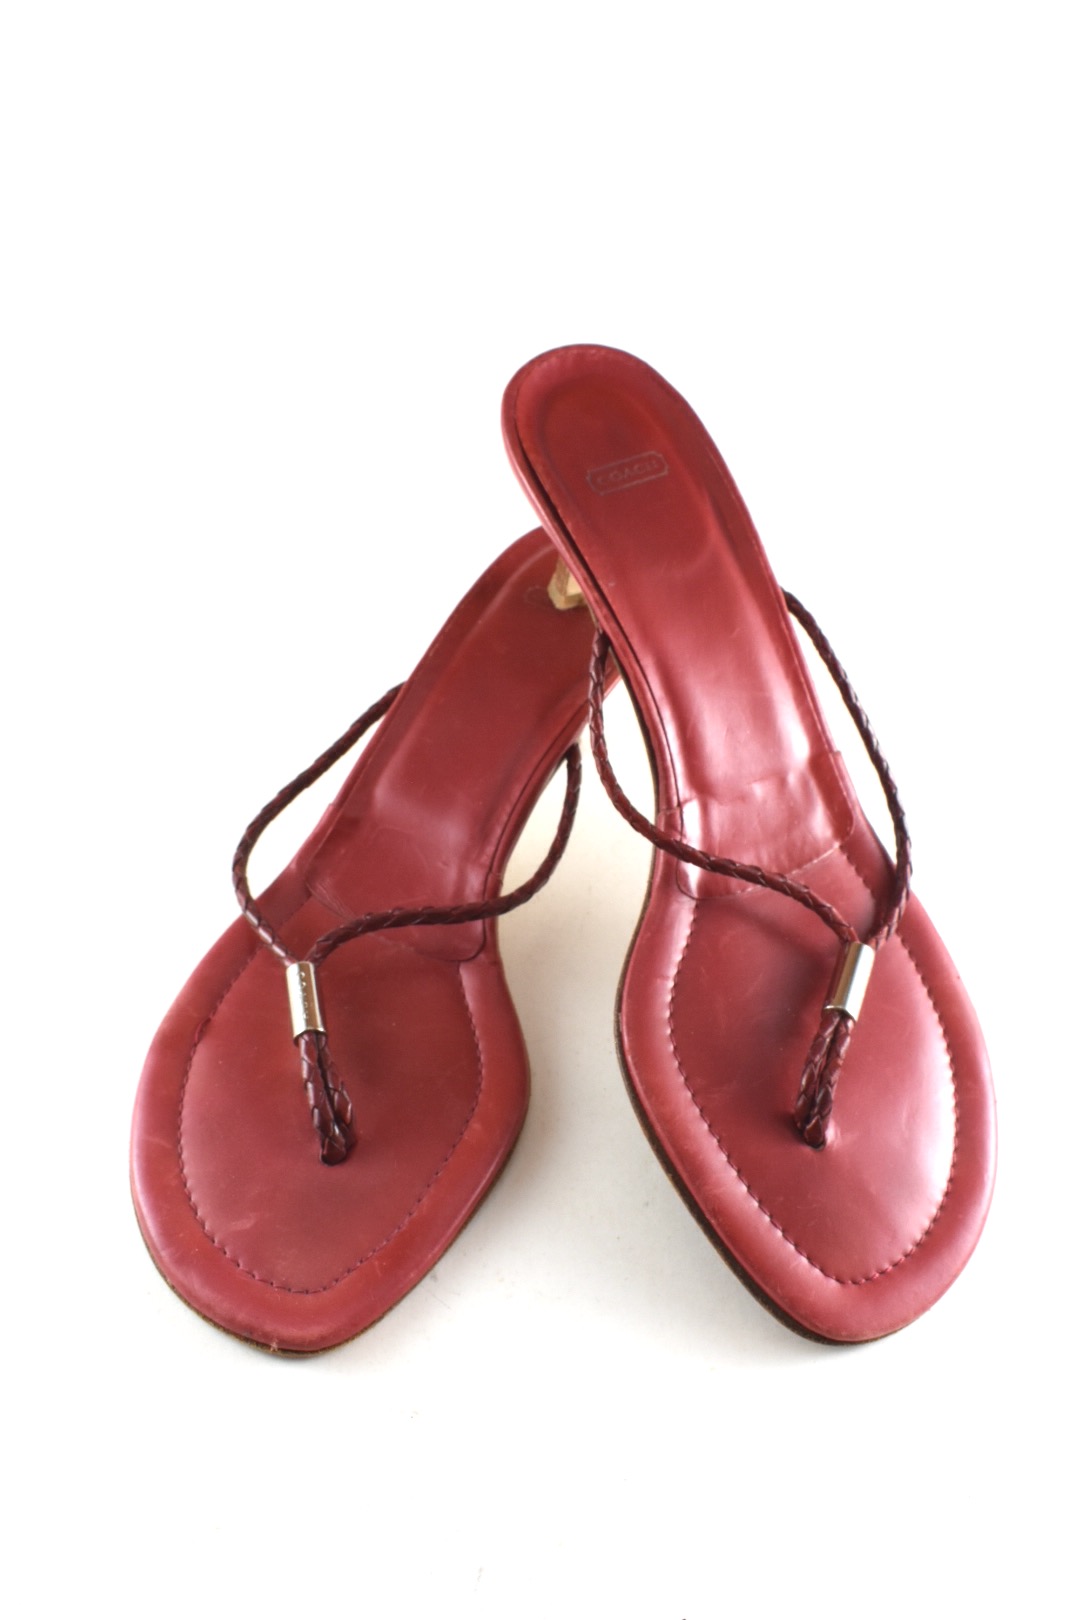 red coach sandals